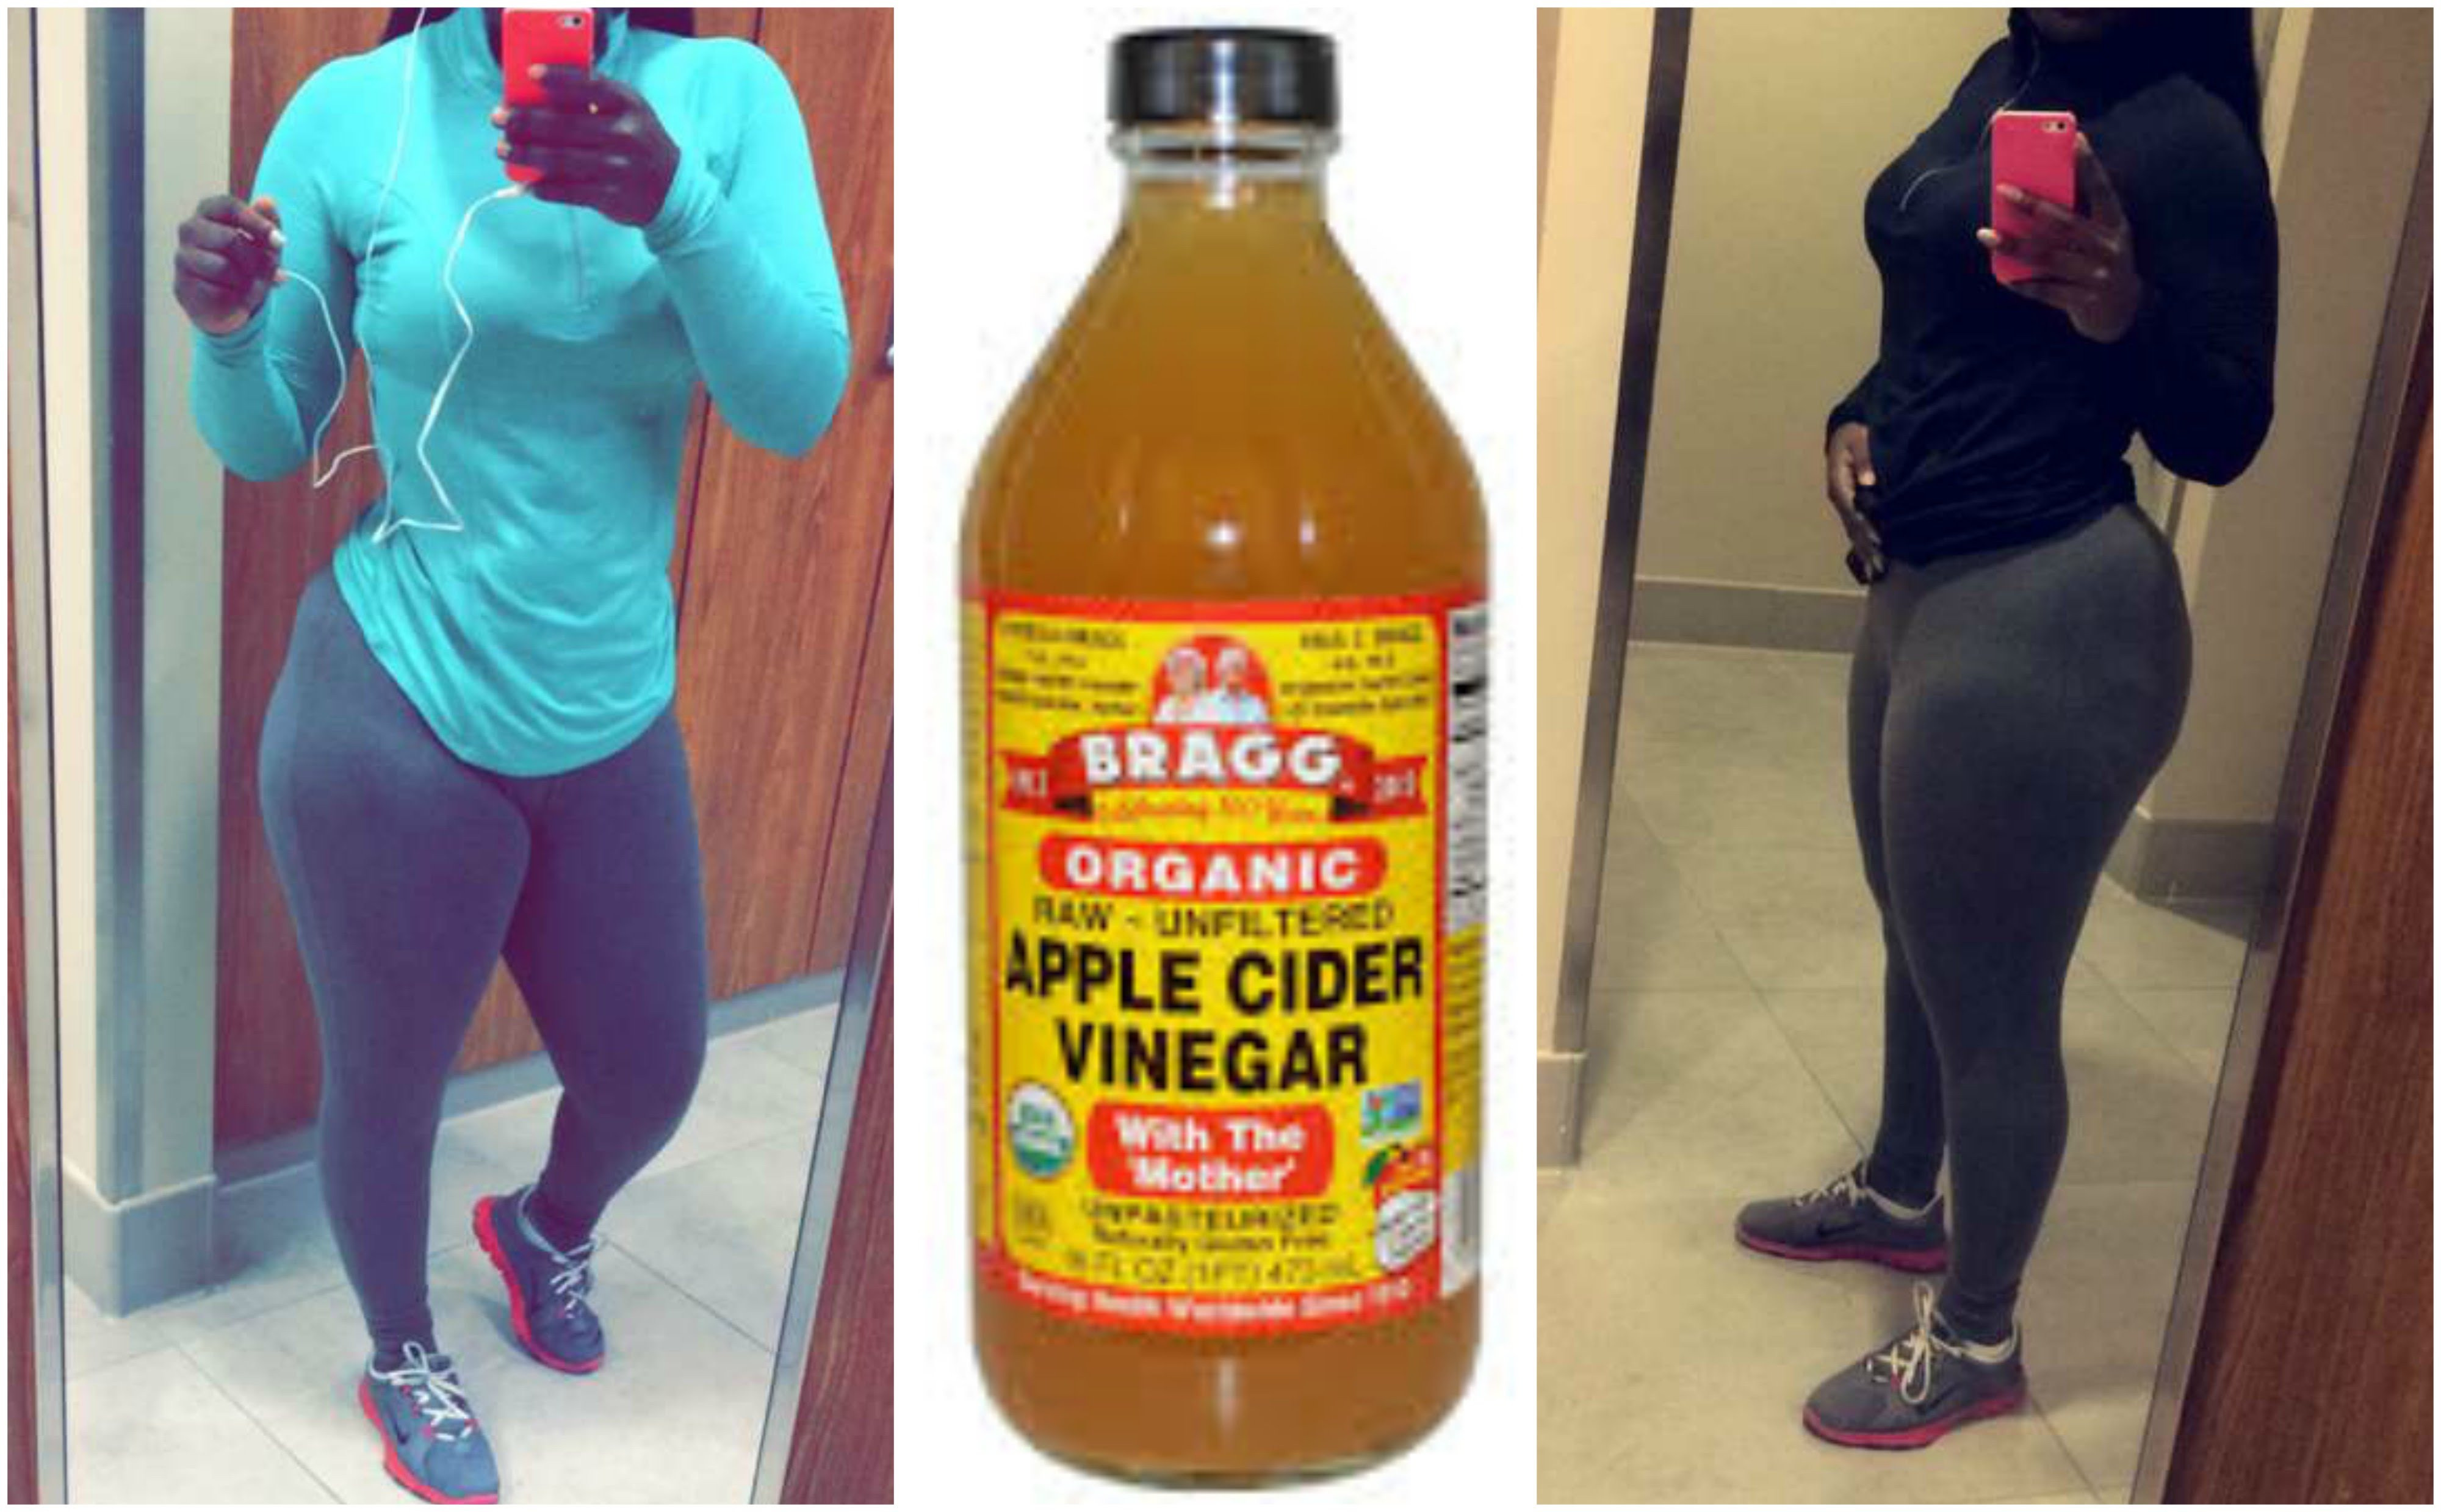 Apple Cider Vinegar Weight Loss Reviews
 How To Lose Weight With Apple Cider Vinegar and Other Tips